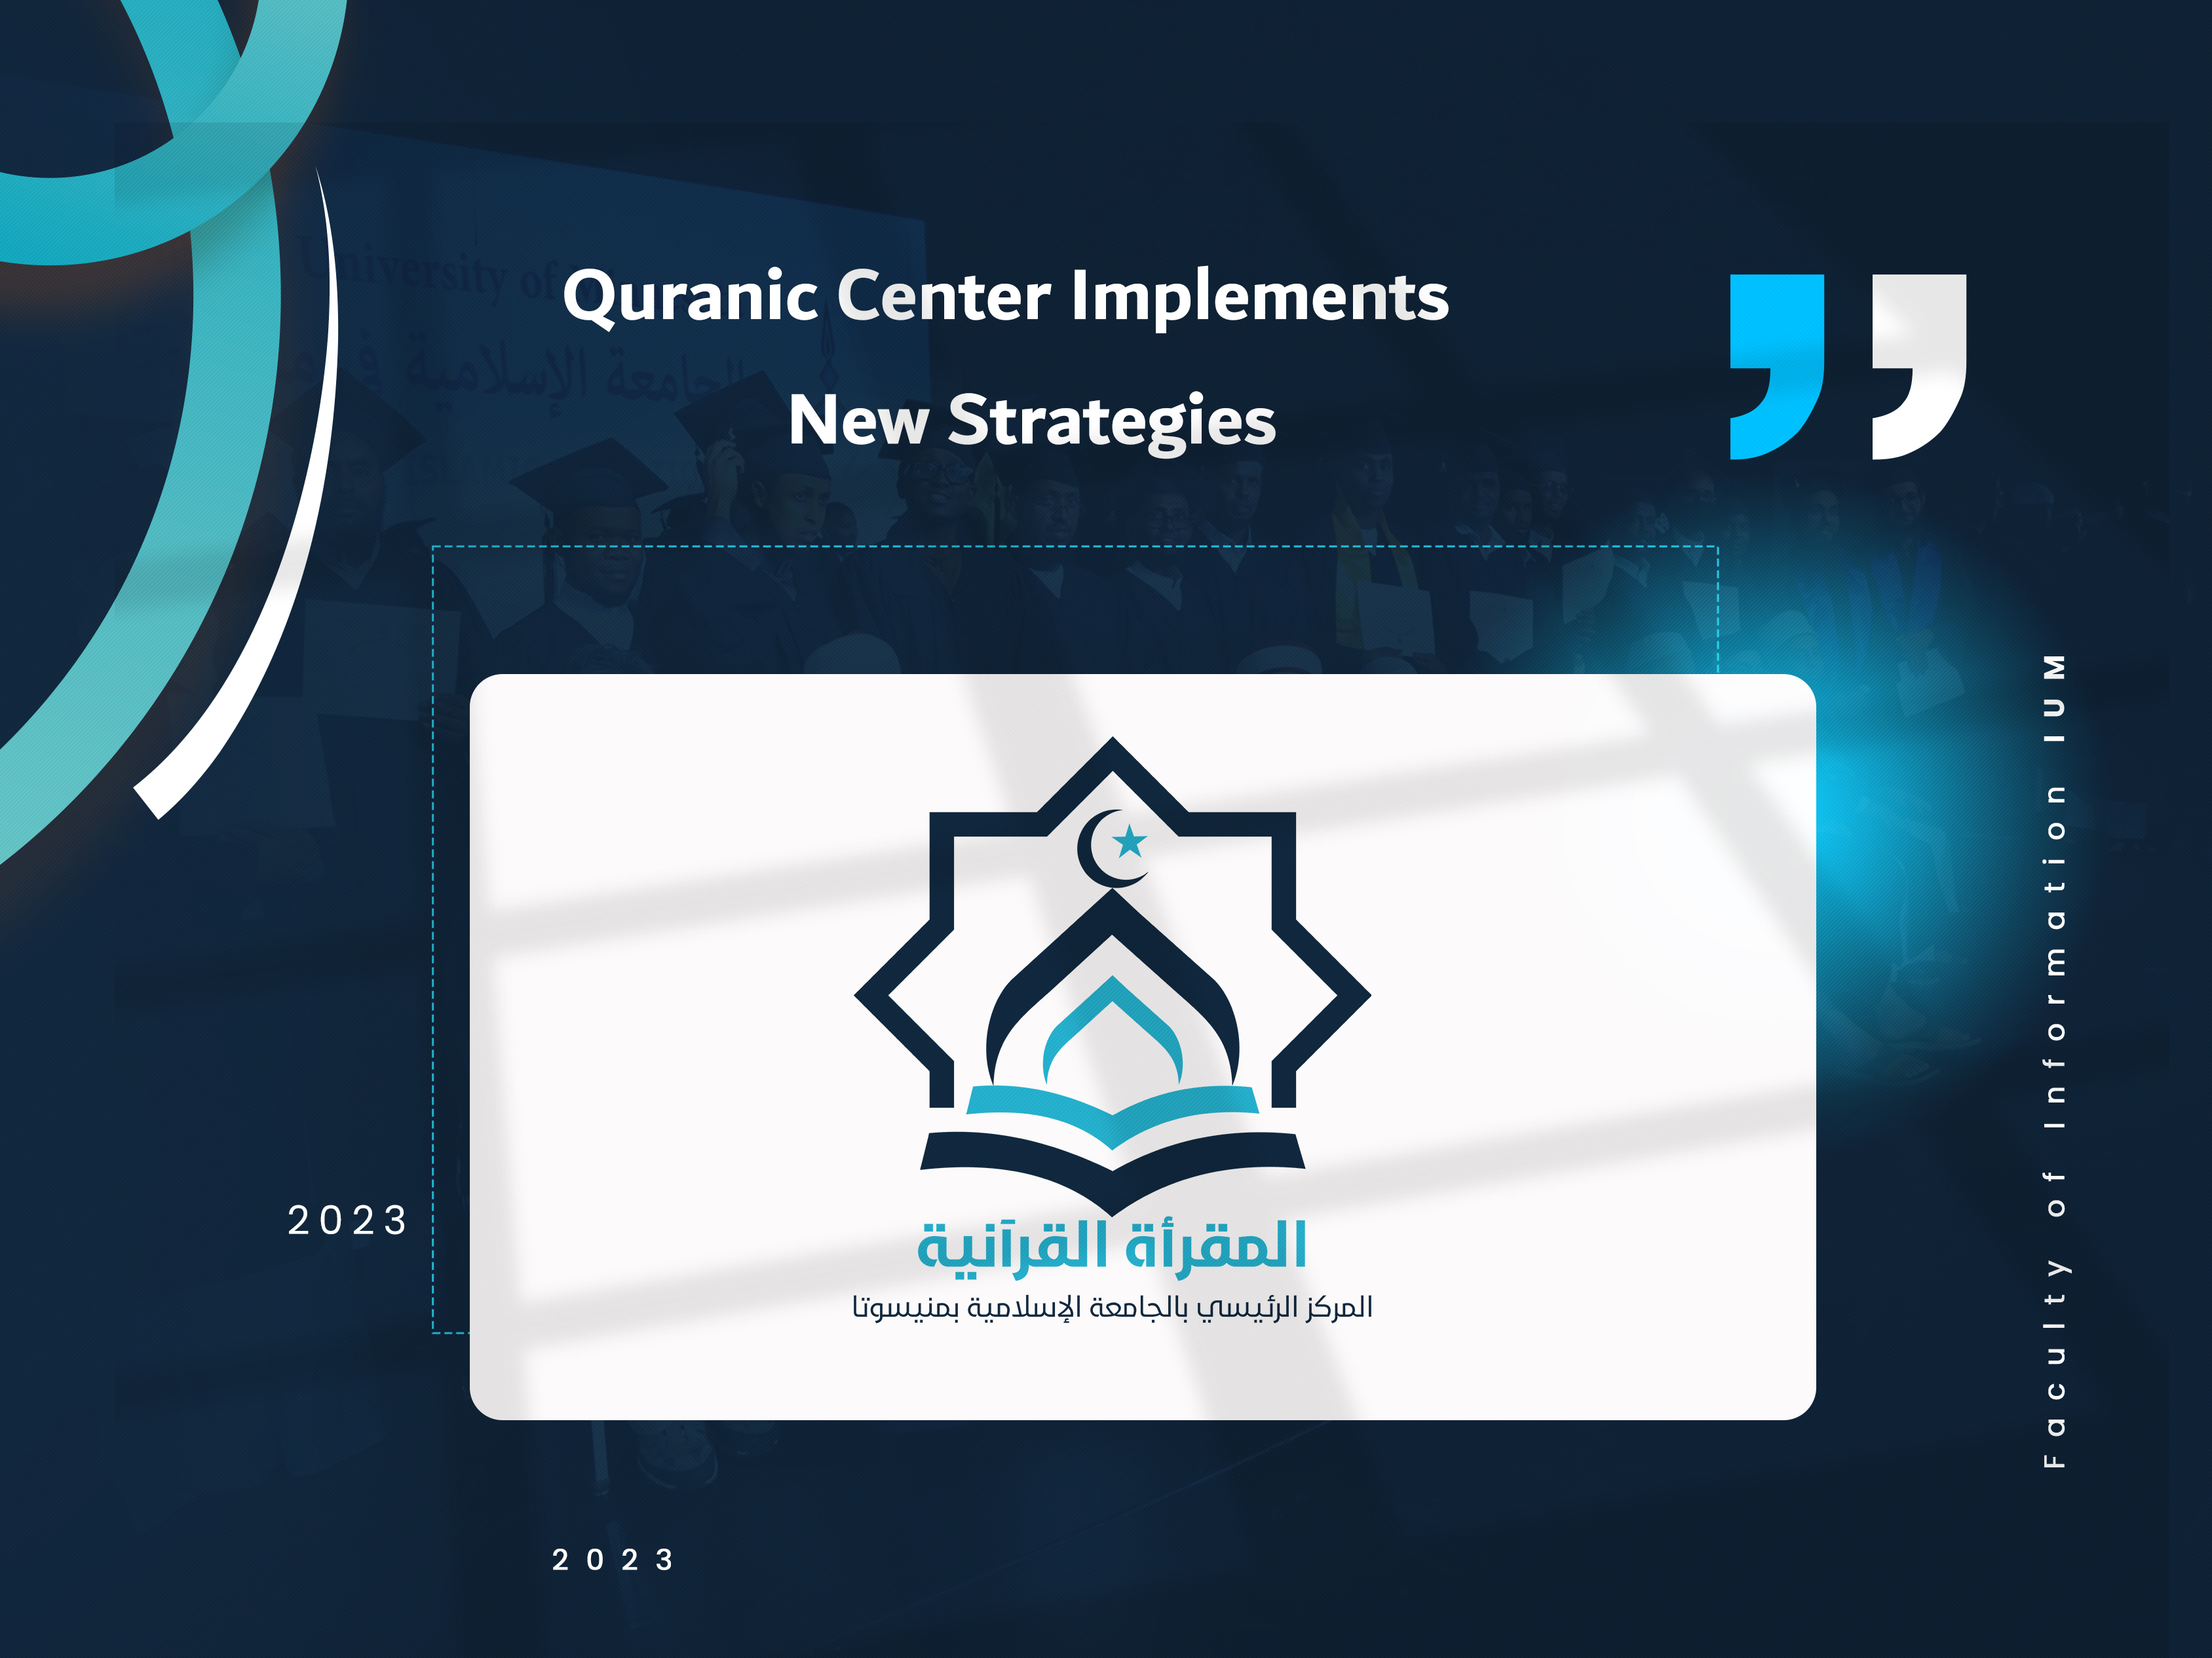 Quranic Center Implements New Strategies